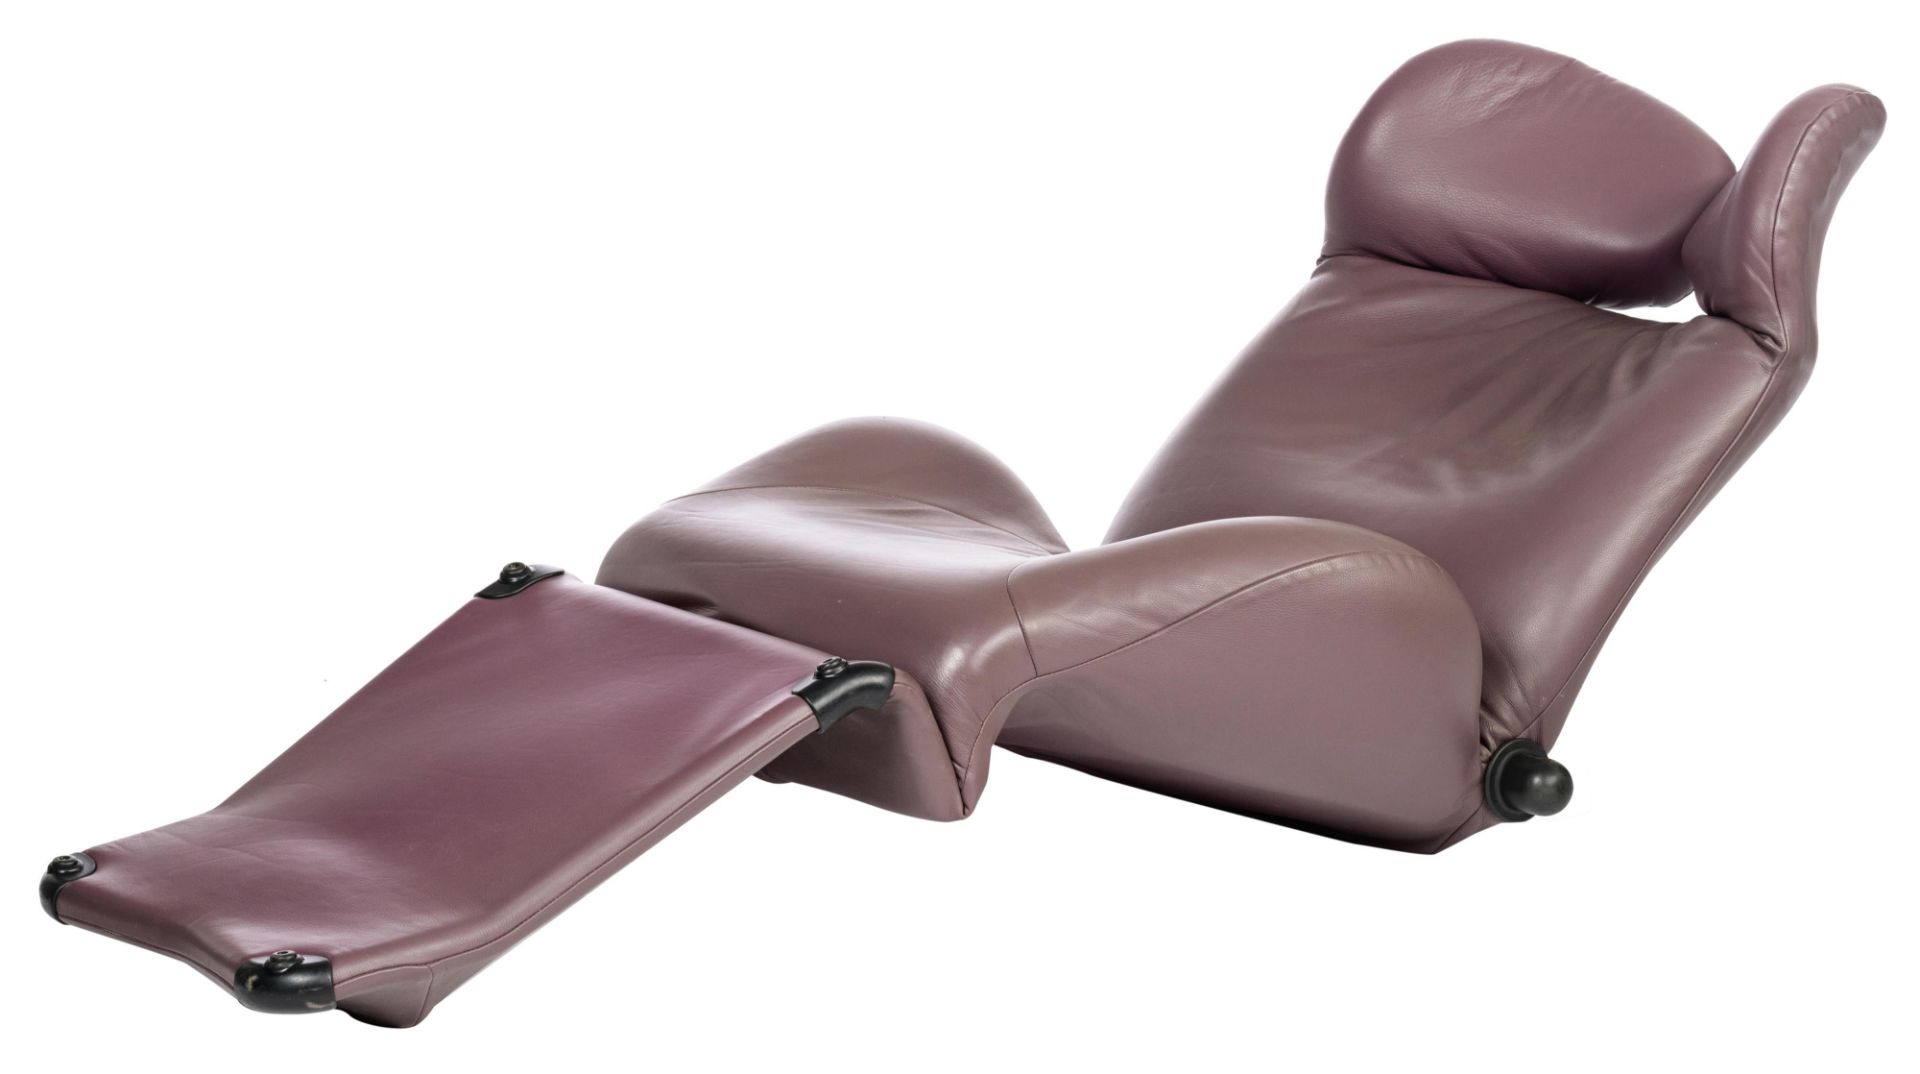 A cassina wink fauteuil, with easily removable covers, H 102 - L 135 - D 83 cm,ÿdimensions in lying